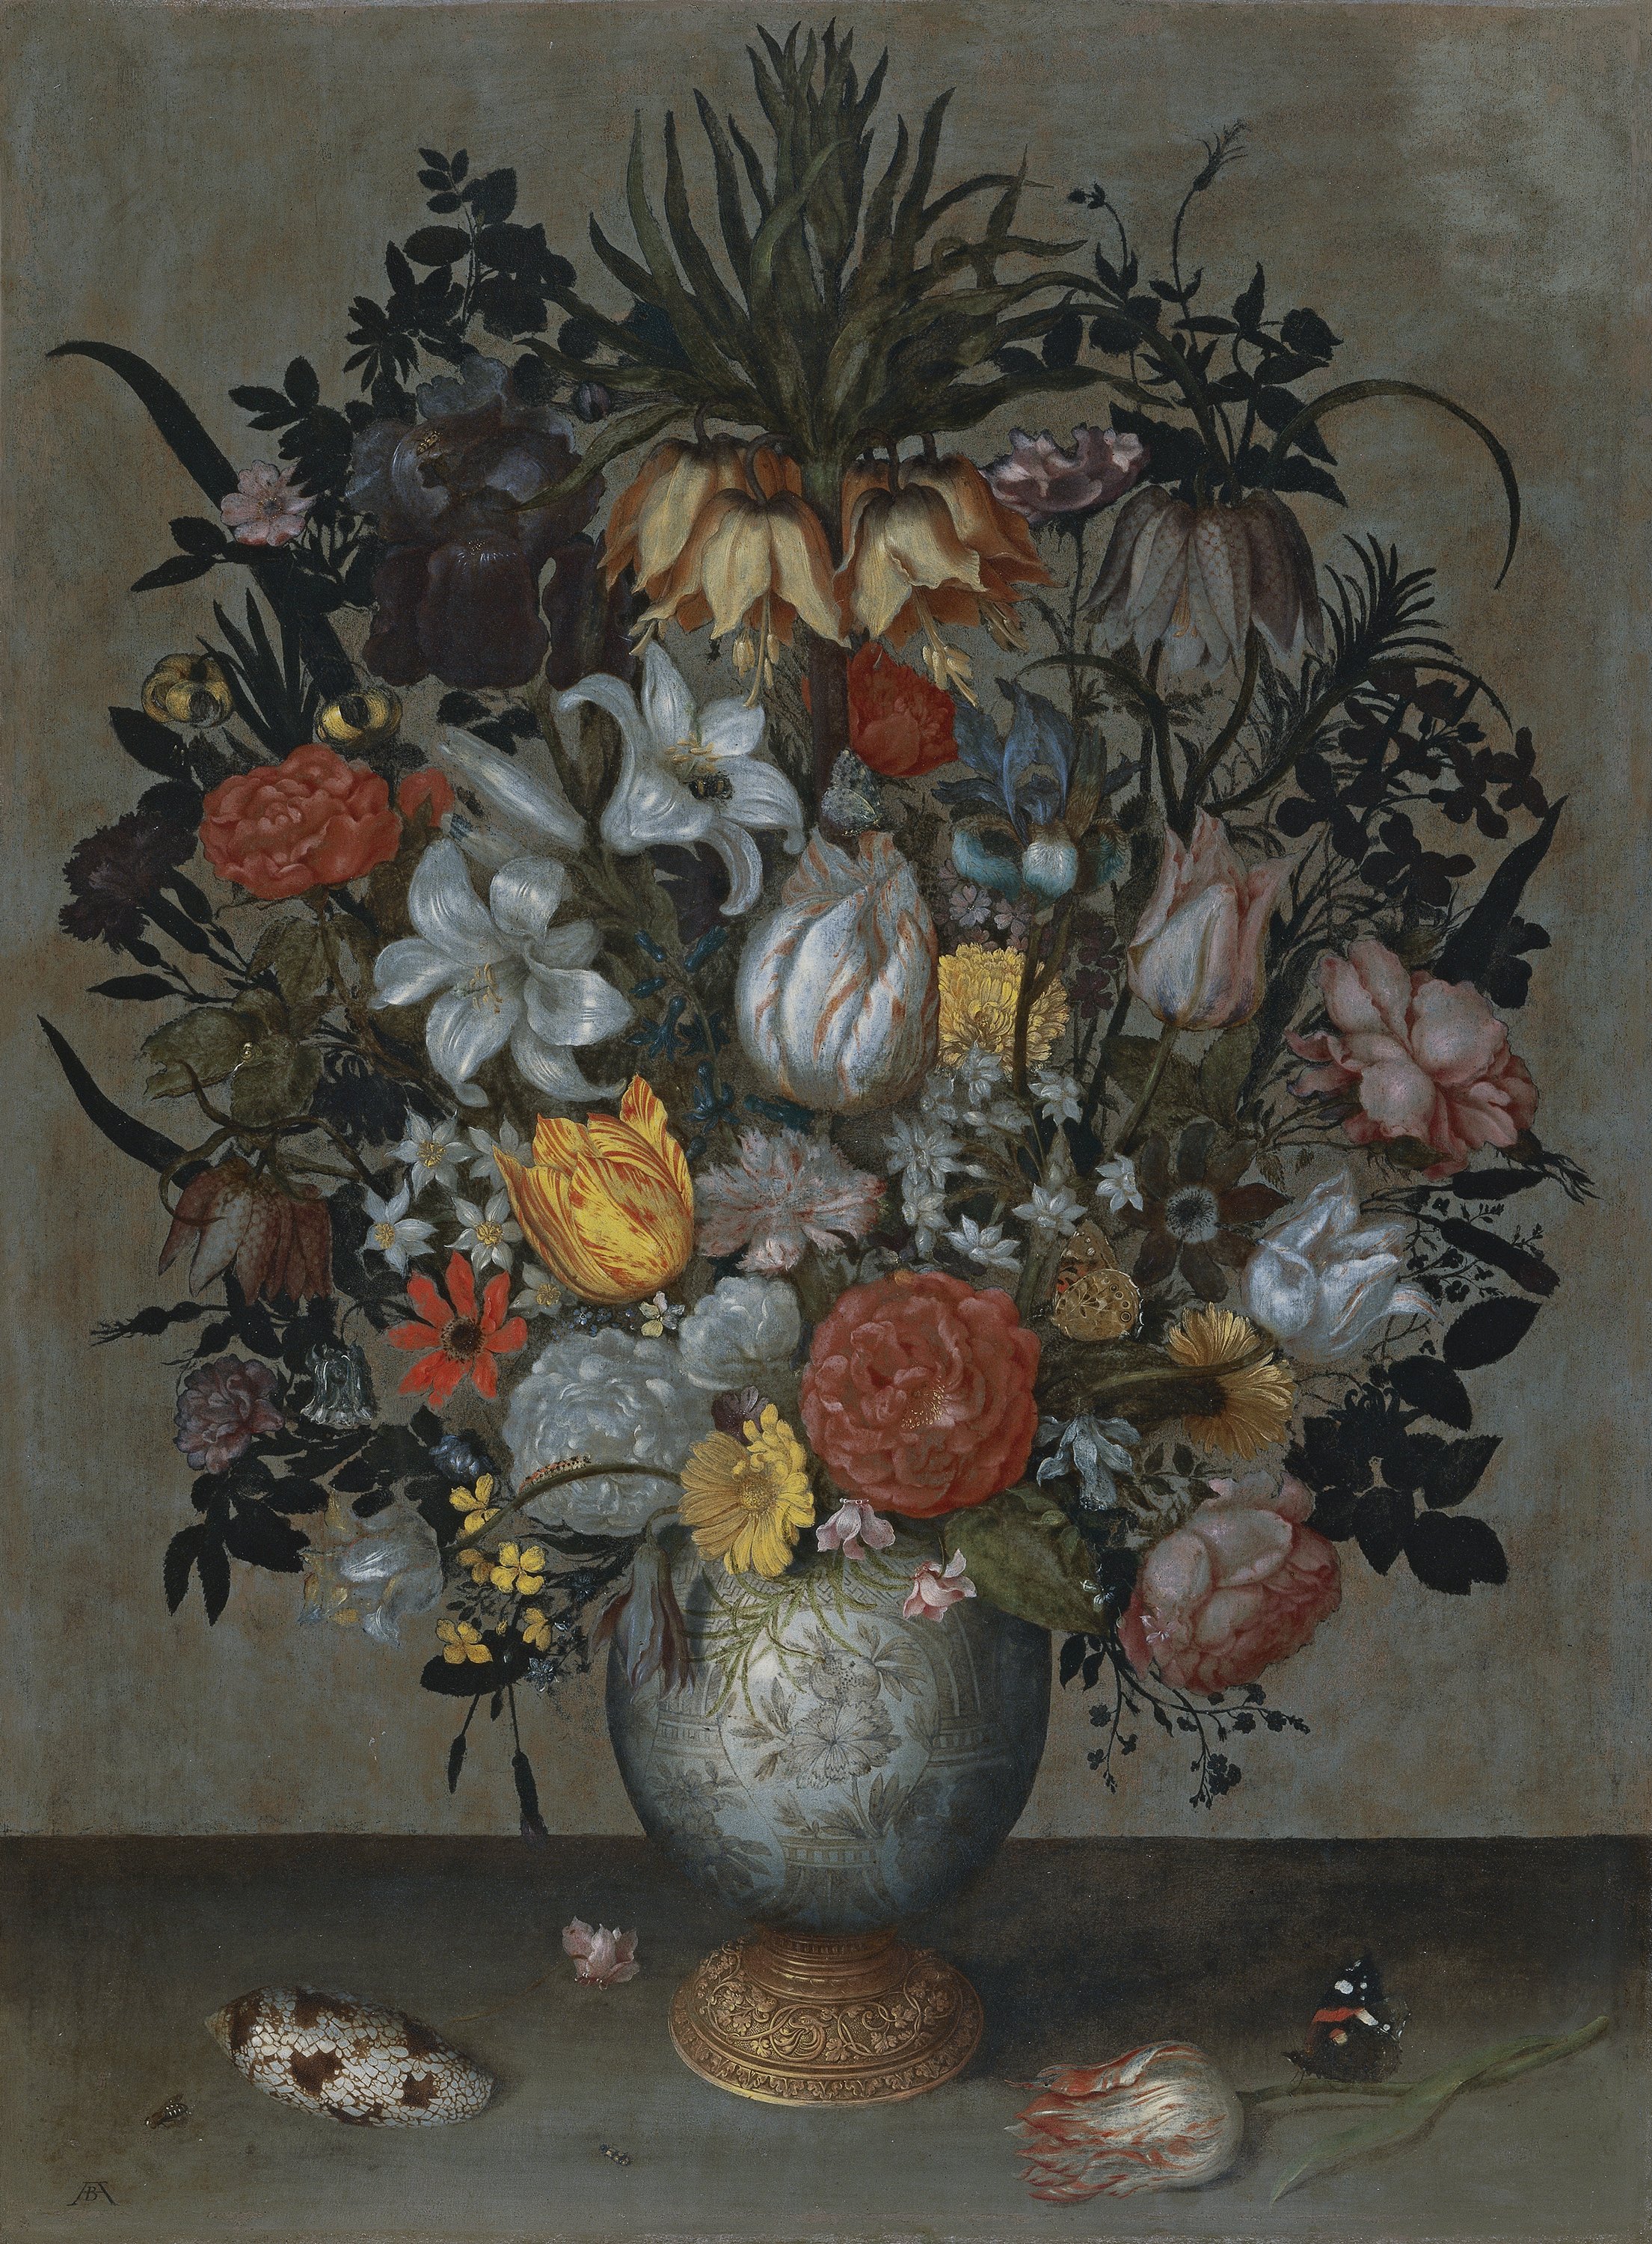 Chinese Vase with Flowers, Shell and Insects. Vaso chino con flores, conchas e insectos, c.1609